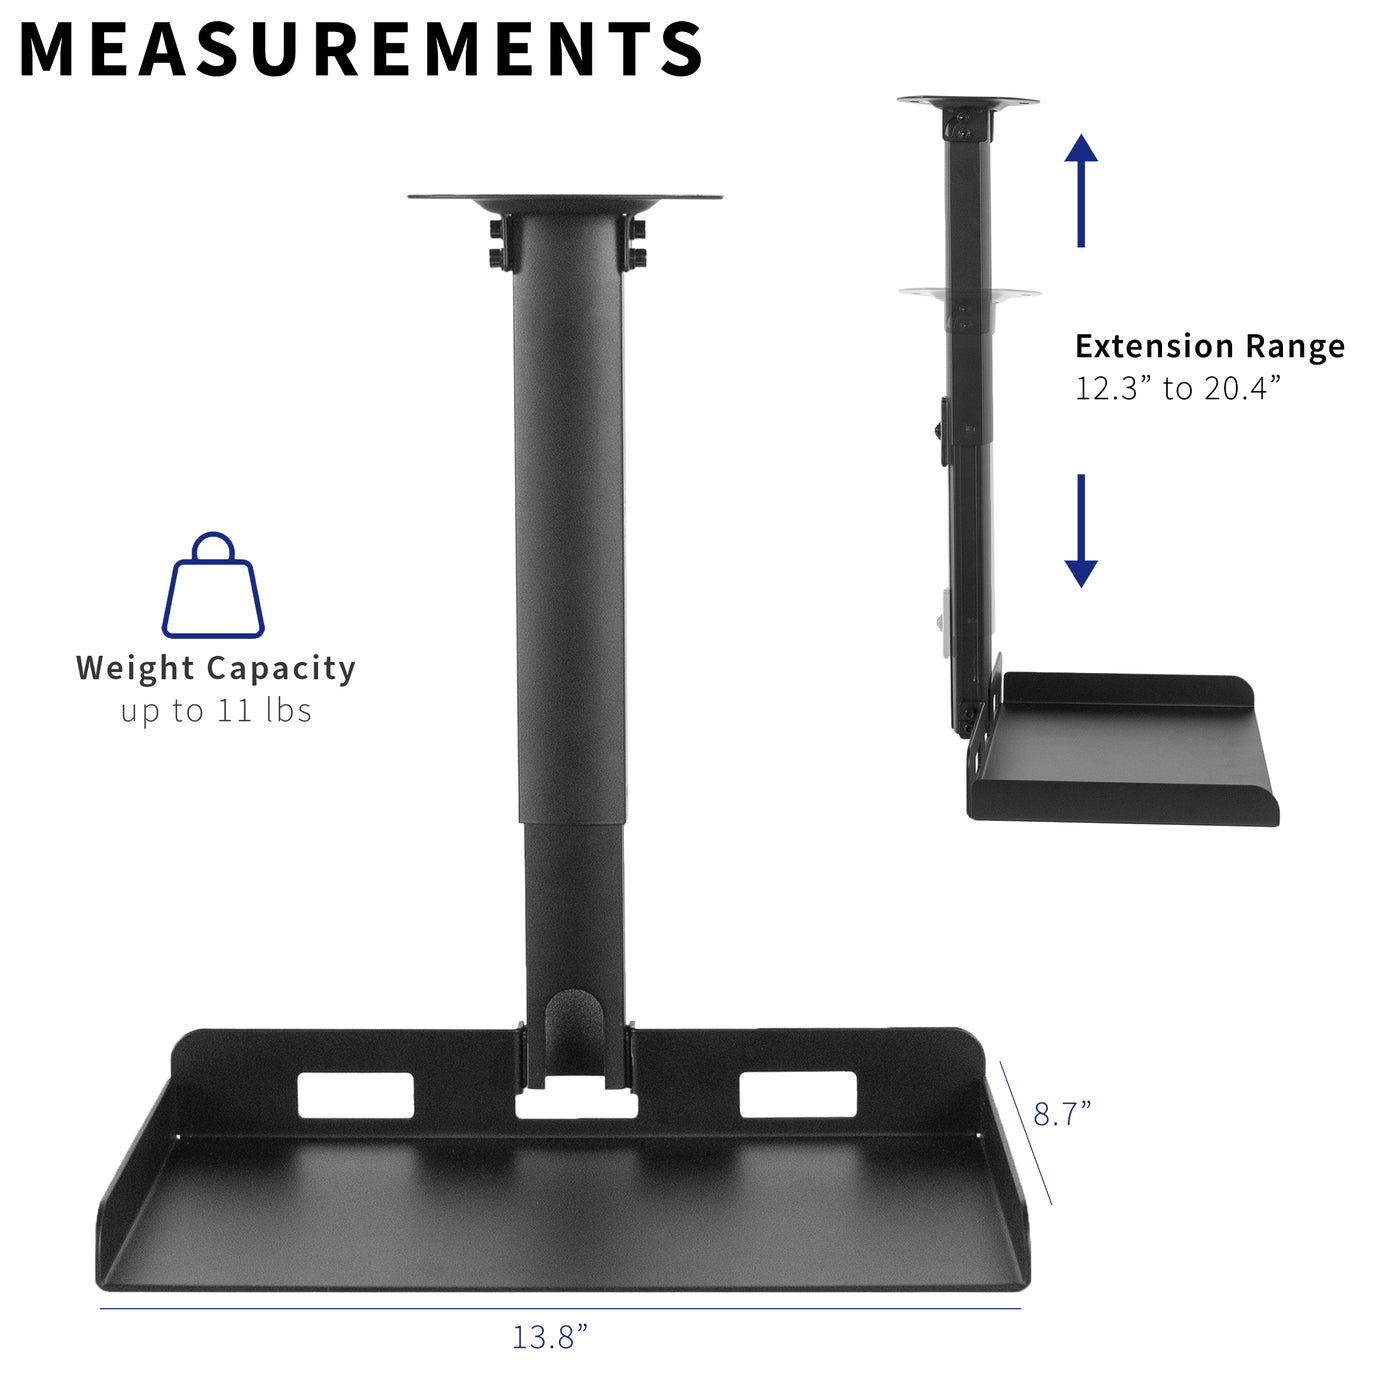 Measurements and extension of height range and shelf.